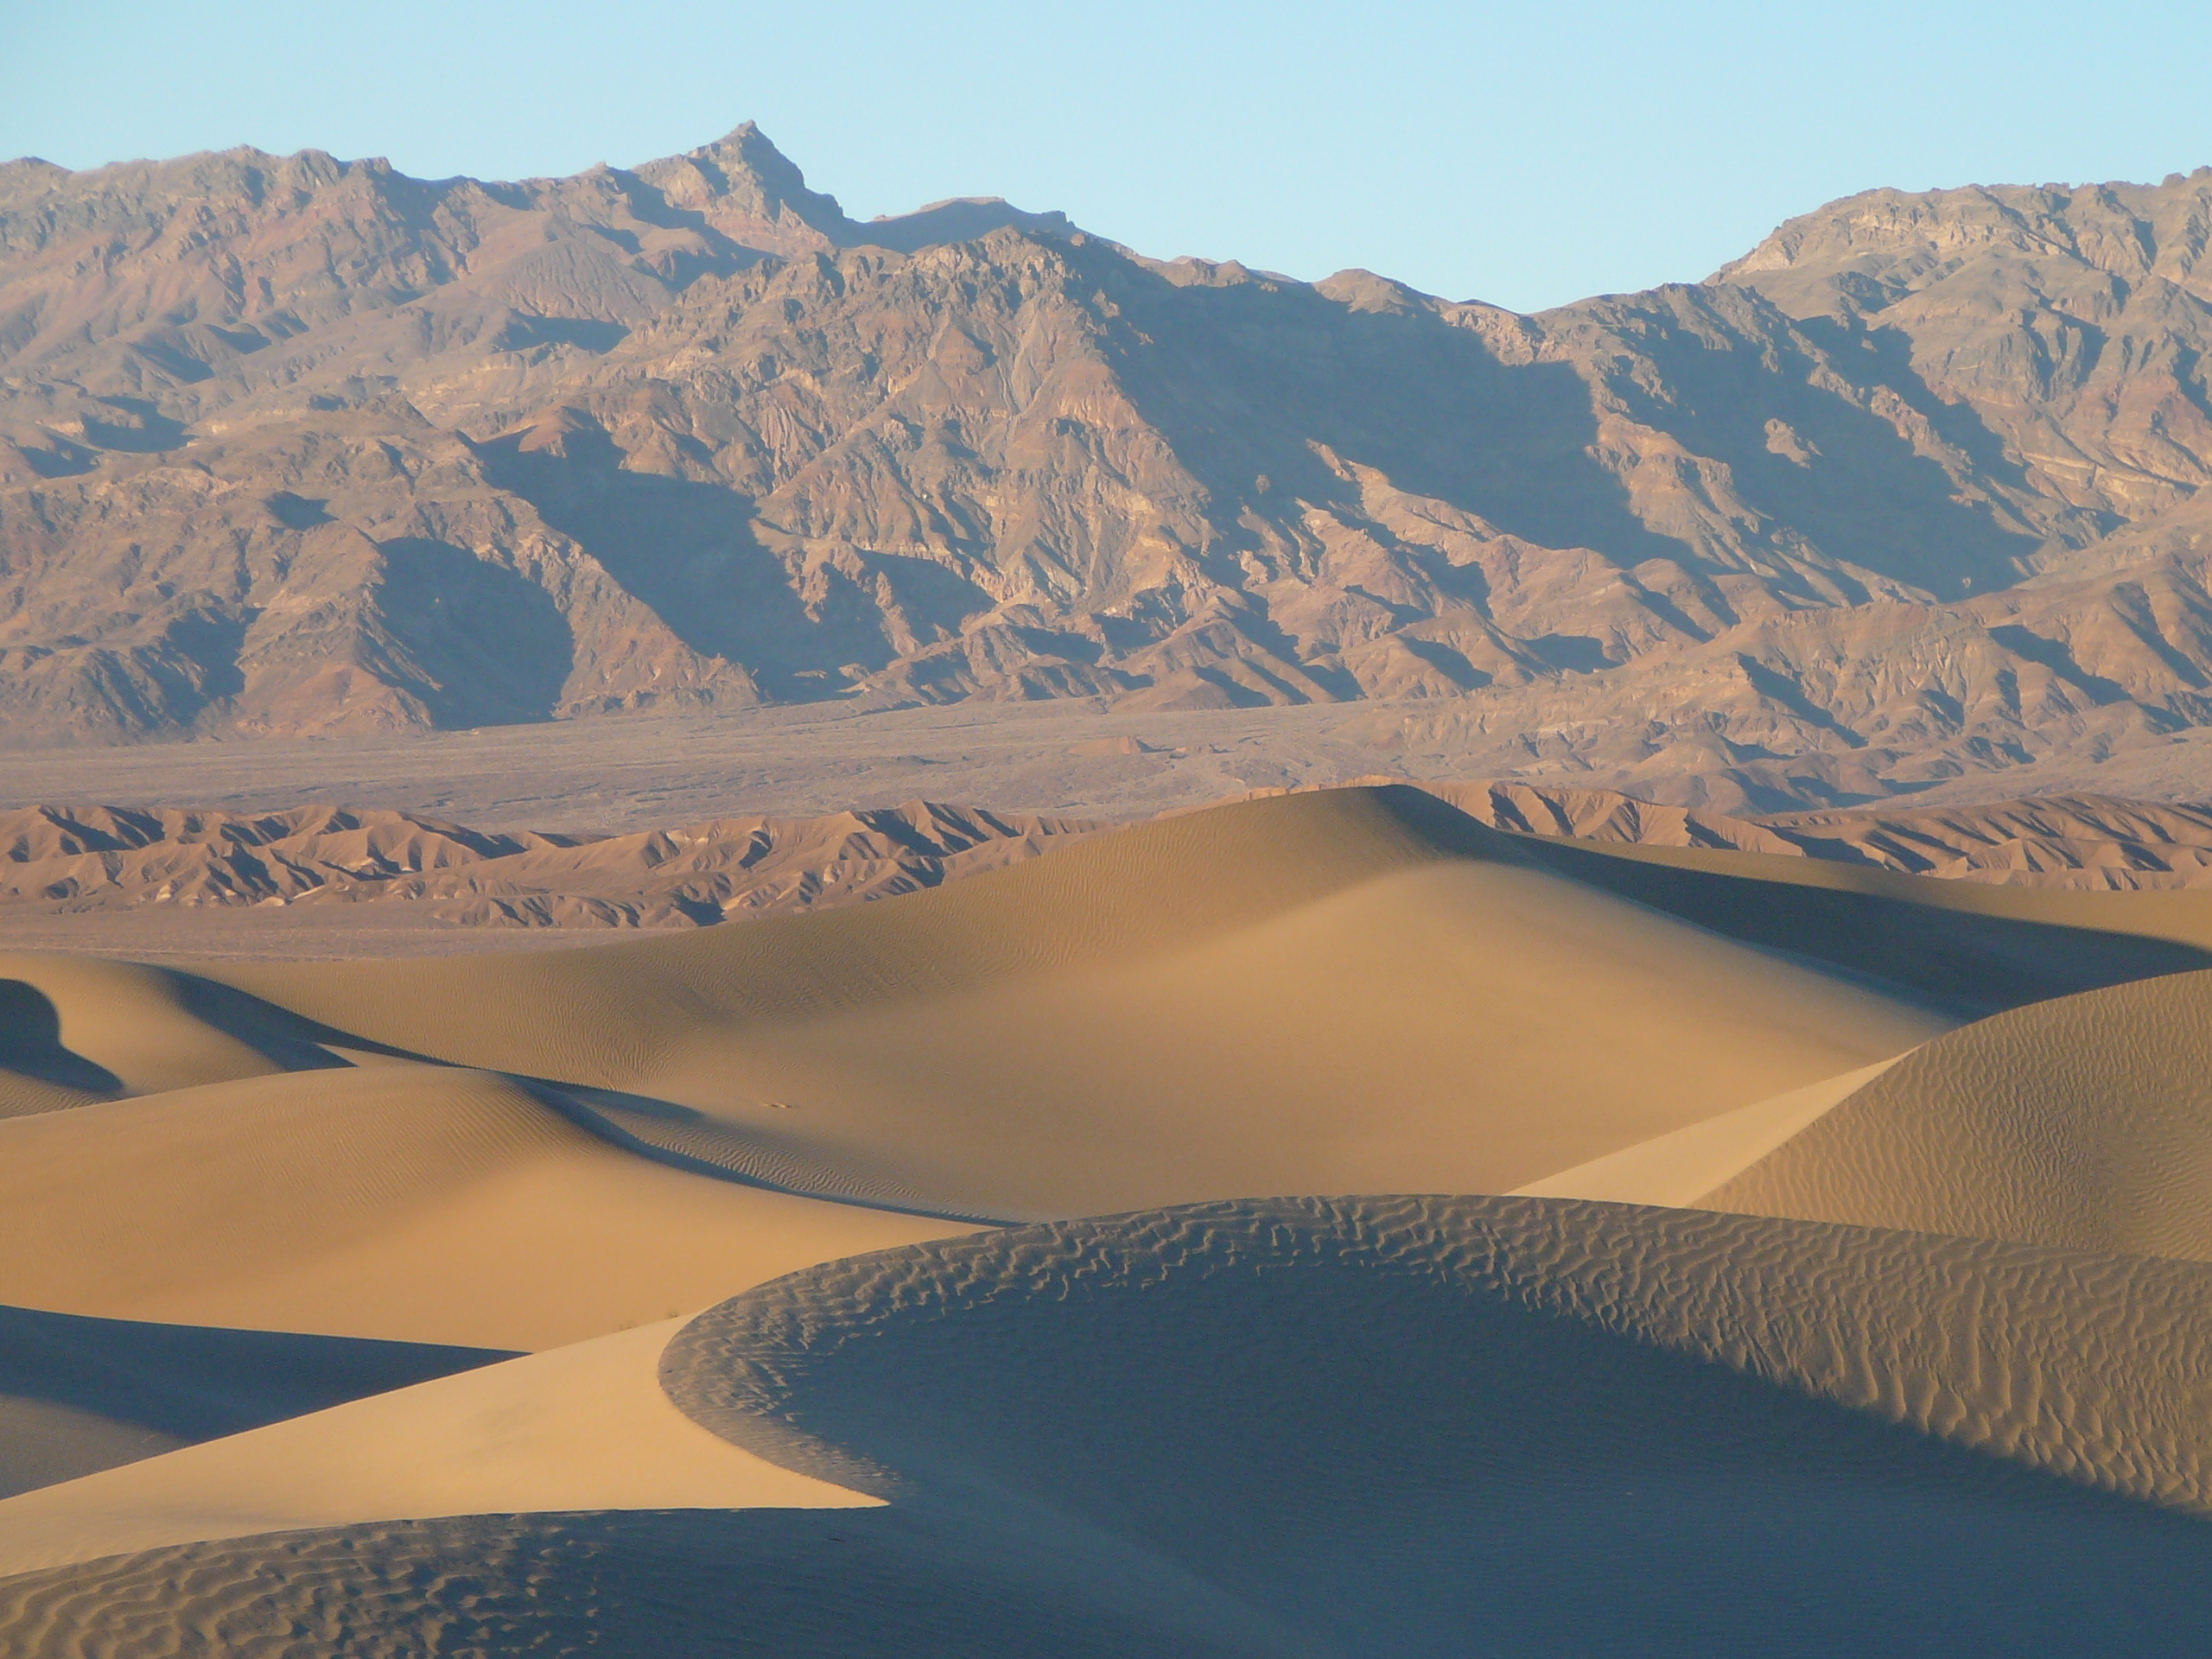 Tan sand dunes, with tall brown mountains in the background.